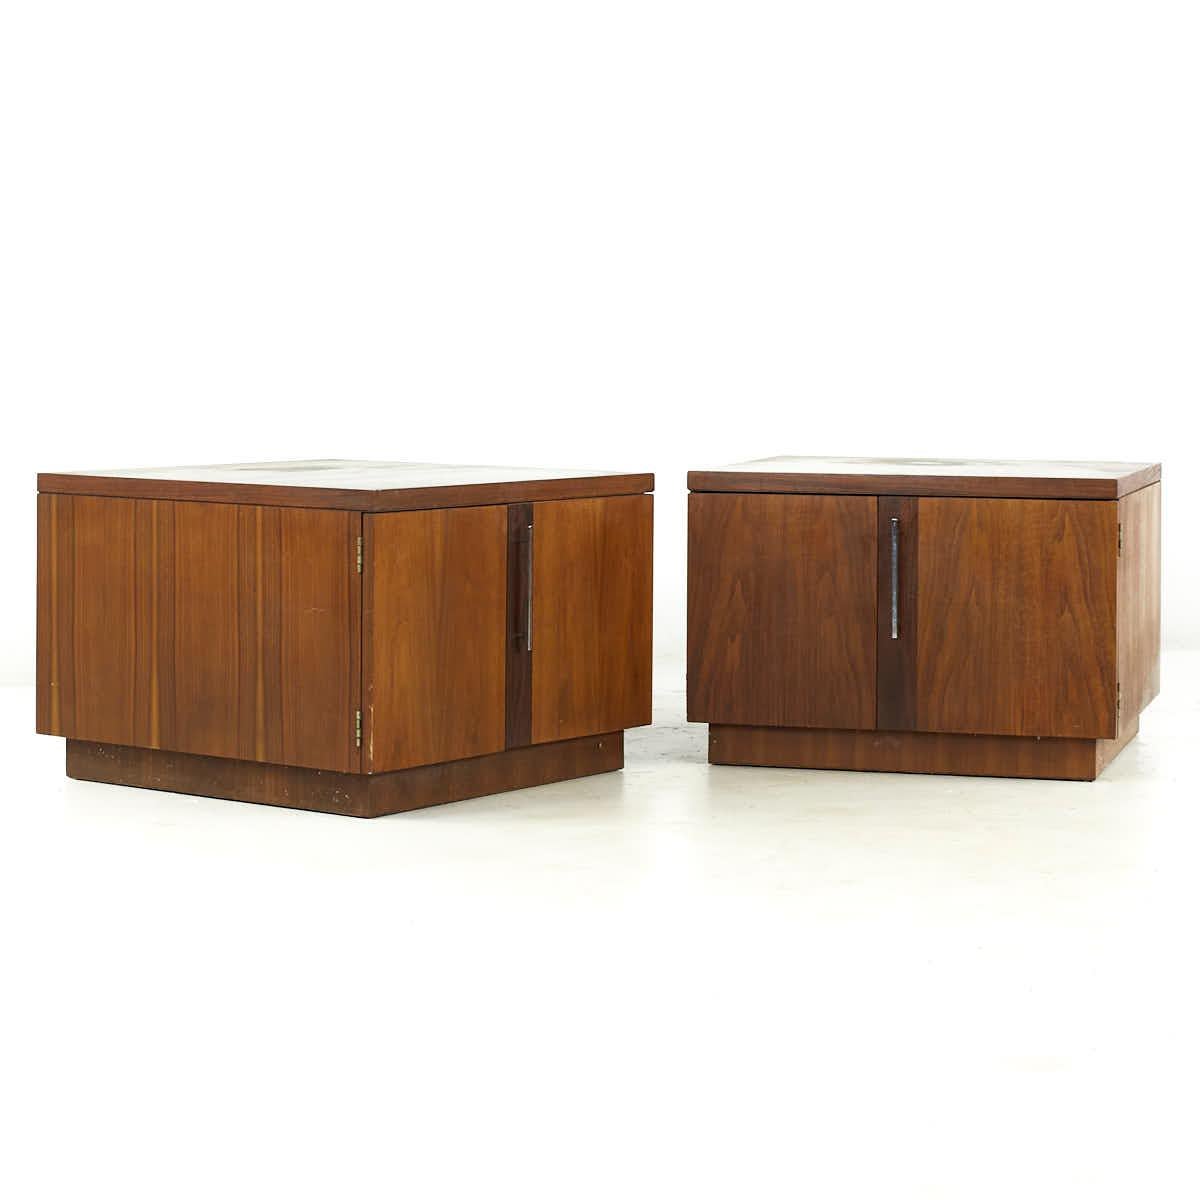 Lane midcentury Walnut Cabinet End Tables – Pair

Each side table measures: 27.5 wide x 27.5 deep x 19 inches high

All pieces of furniture can be had in what we call restored vintage condition. That means the piece is restored upon purchase so